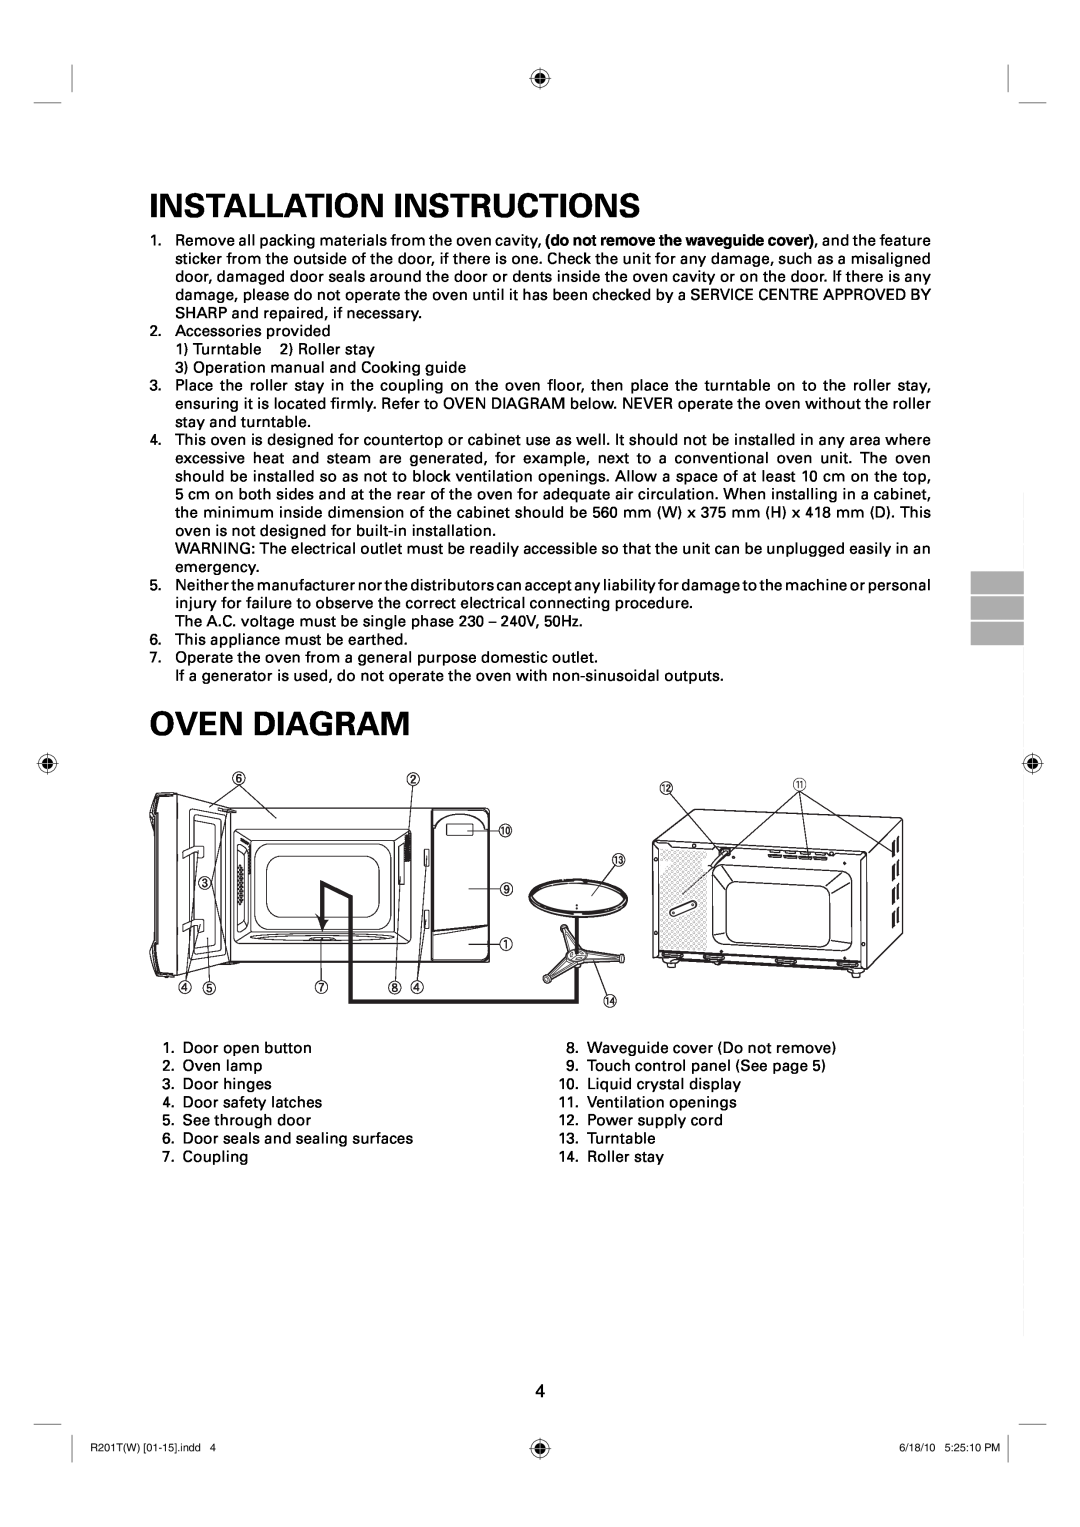 Sharp R-222T(W), R-201T(W) operation manual Installation Instructions, Oven Diagram 